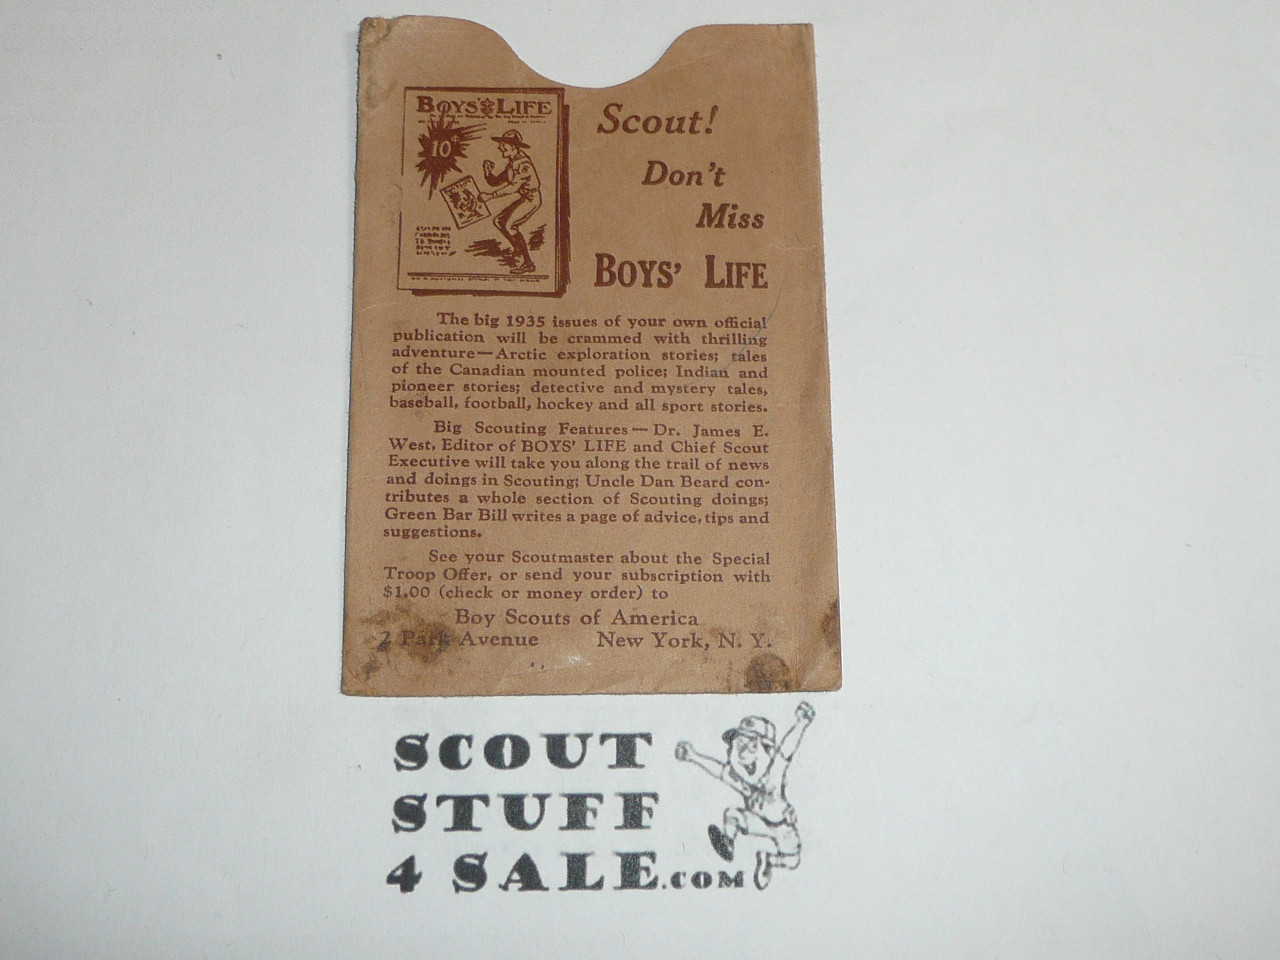 1941 Boy Scout Membership Card, 3-fold, 7 signatures, with envelope, expires February 1941, BSMC39